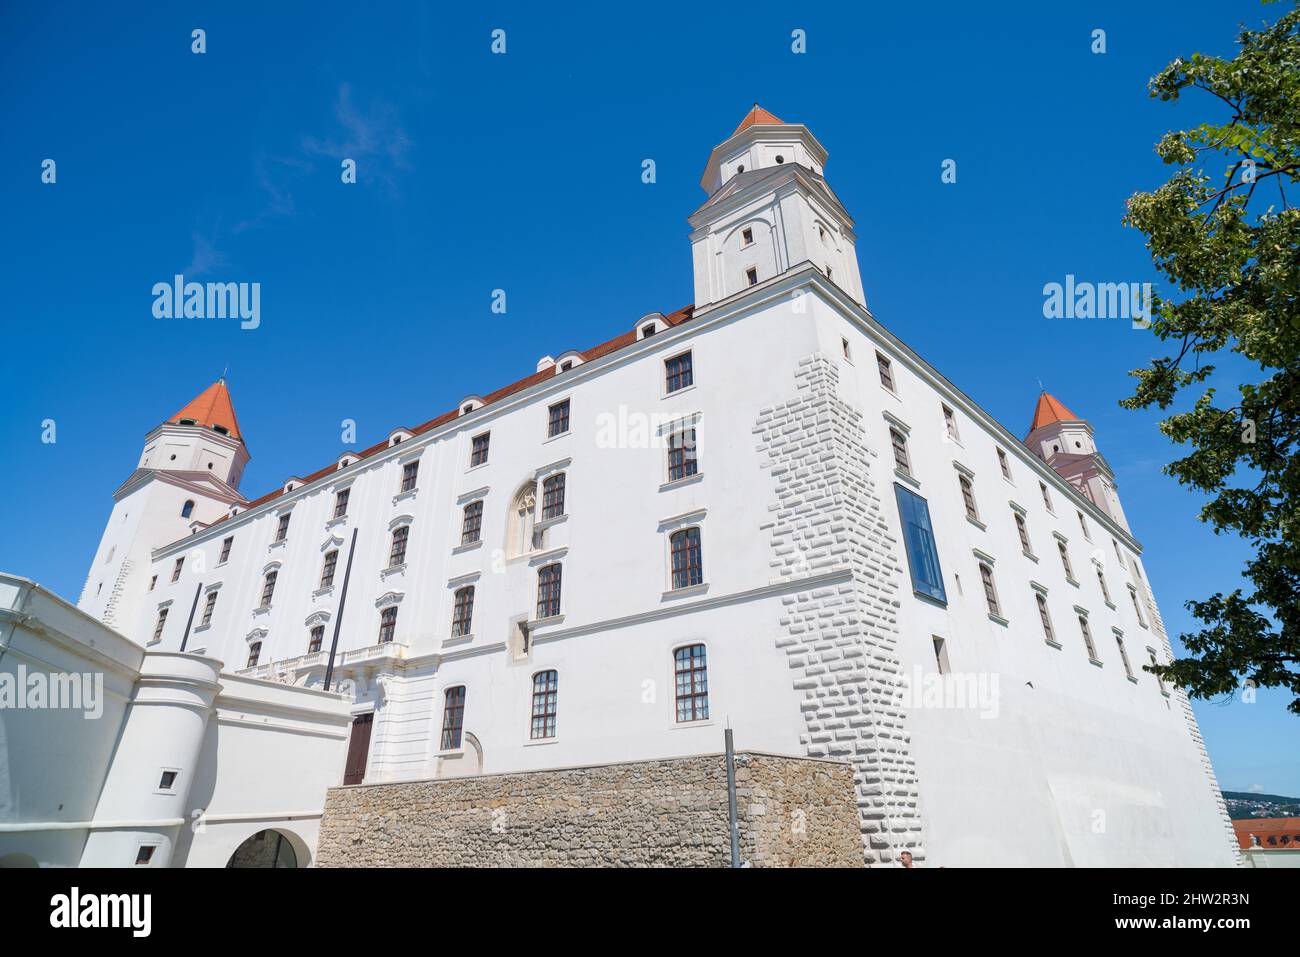 Bratislava Castle is the main castle of Bratislava, the capital of Slovakia. The massive rectangular building with four corner towers stands on an iso Stock Photo